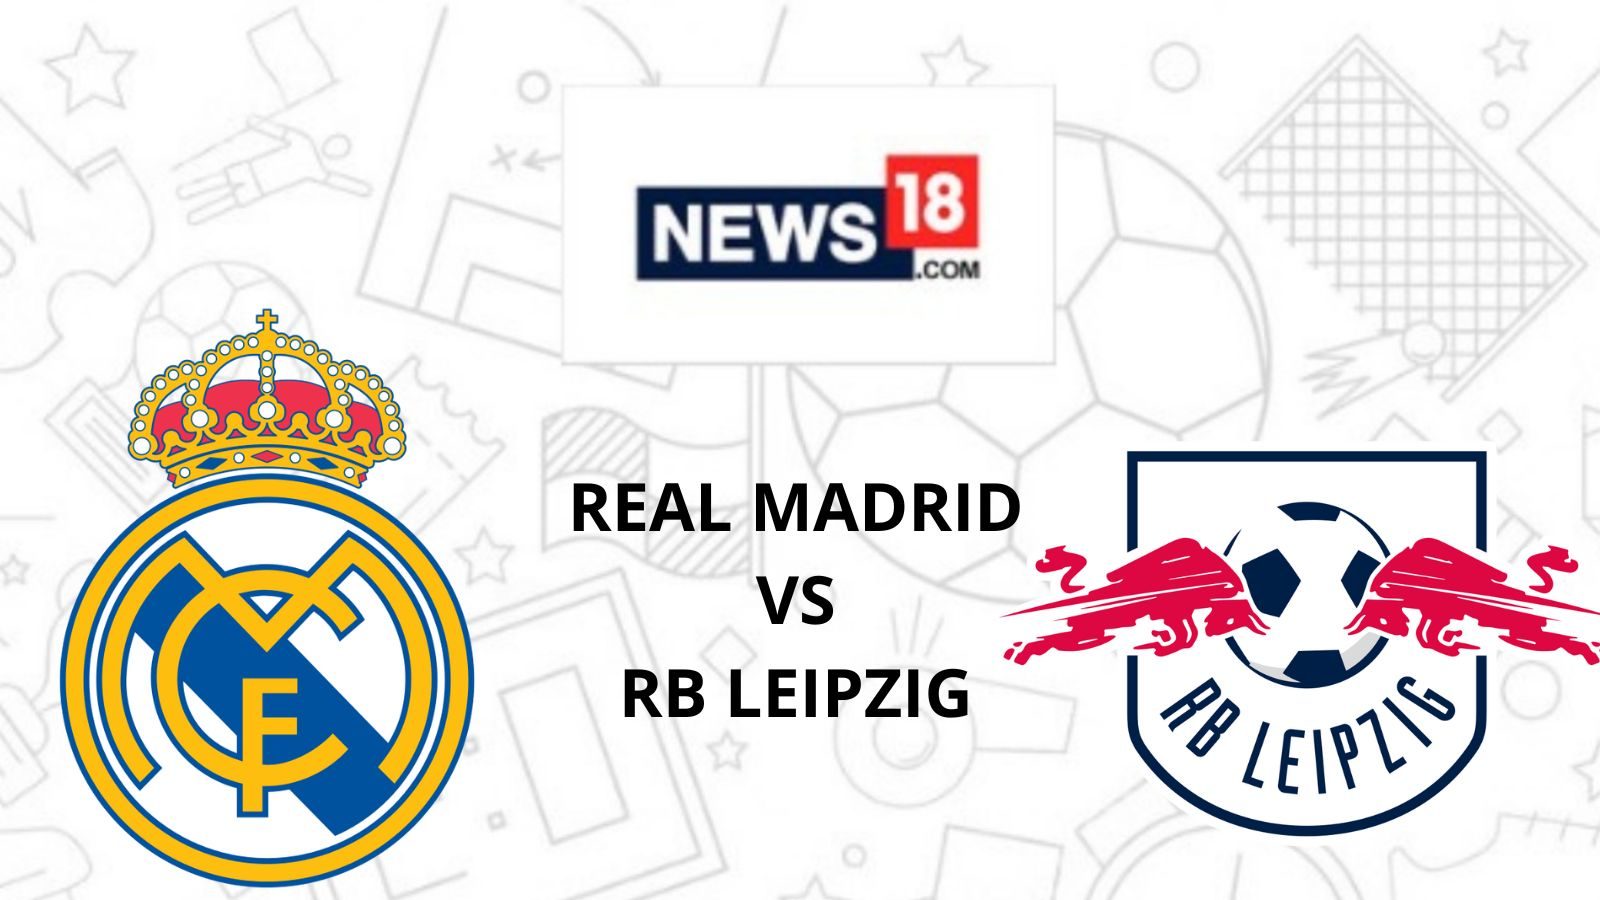 Real Madrid vs RB Leipzig Live Streaming When and Where to Watch Real Madrid vs RB Leipzig UEFA Champions League Live Coverage on Live TV Online 